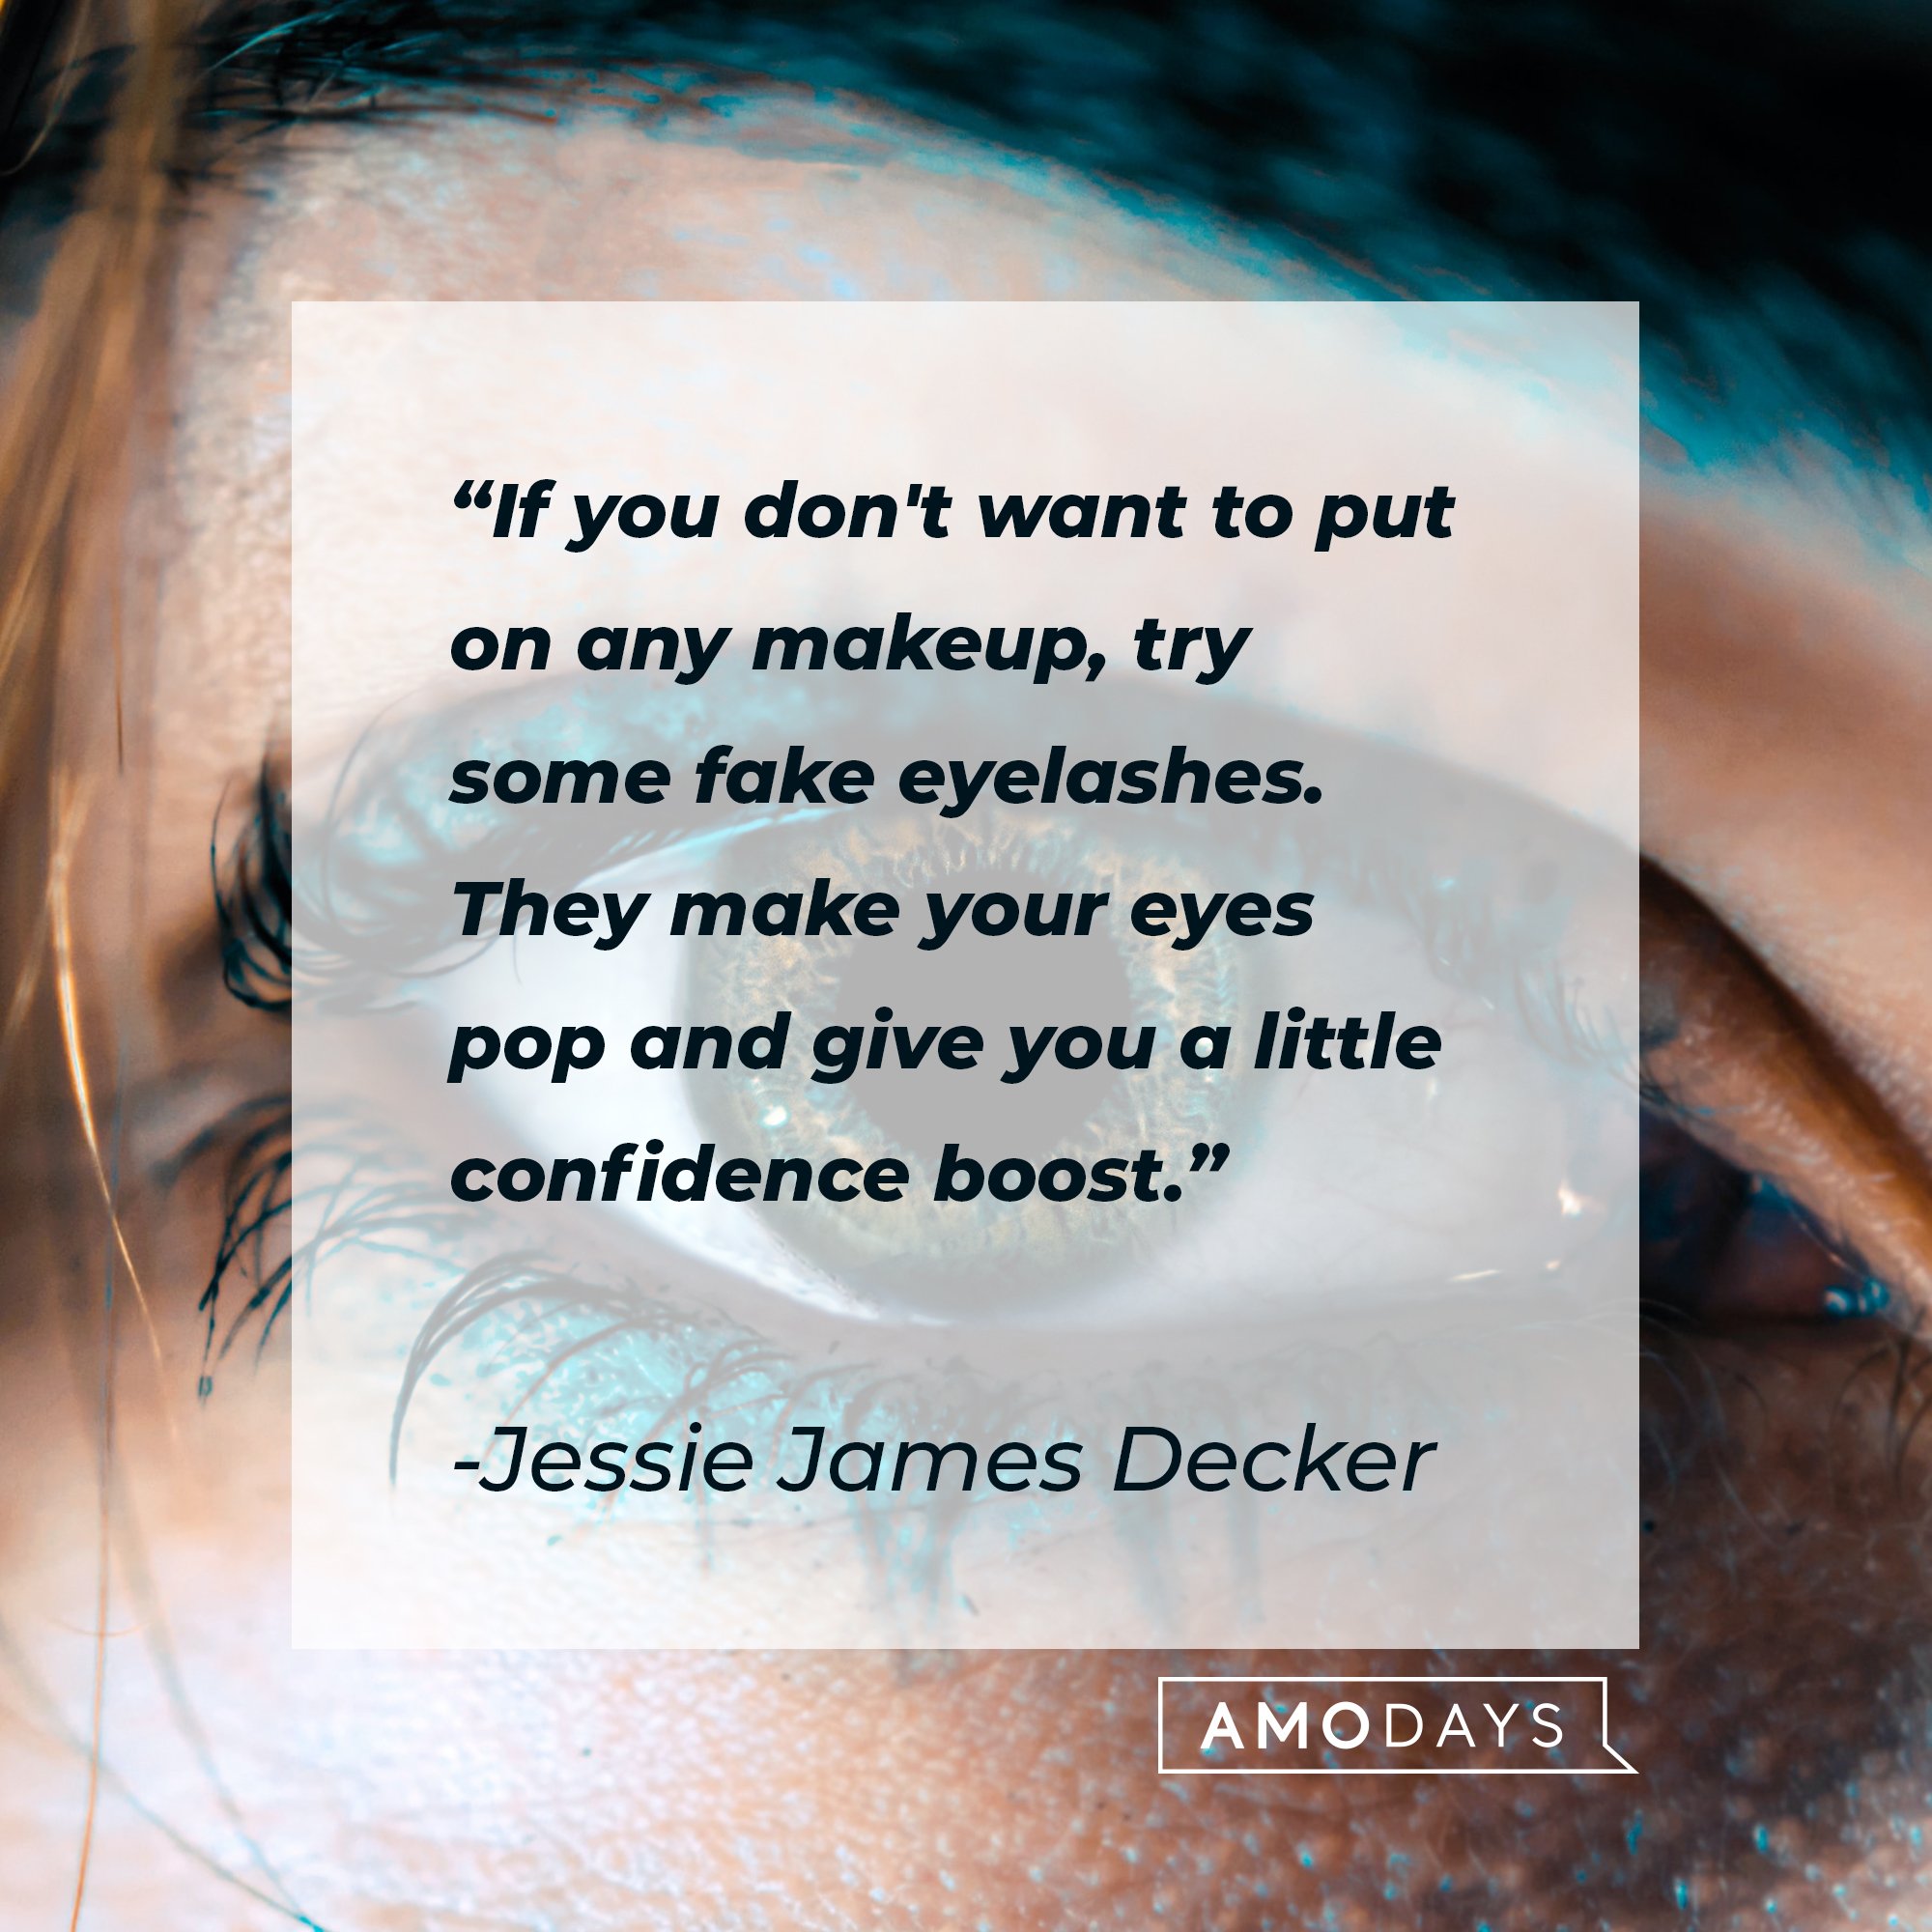  Jessie James Decker’s quote: "If you don't want to put on any makeup, try some fake eyelashes. They make your eyes pop and give you a little confidence boost." | Image: AmoDays